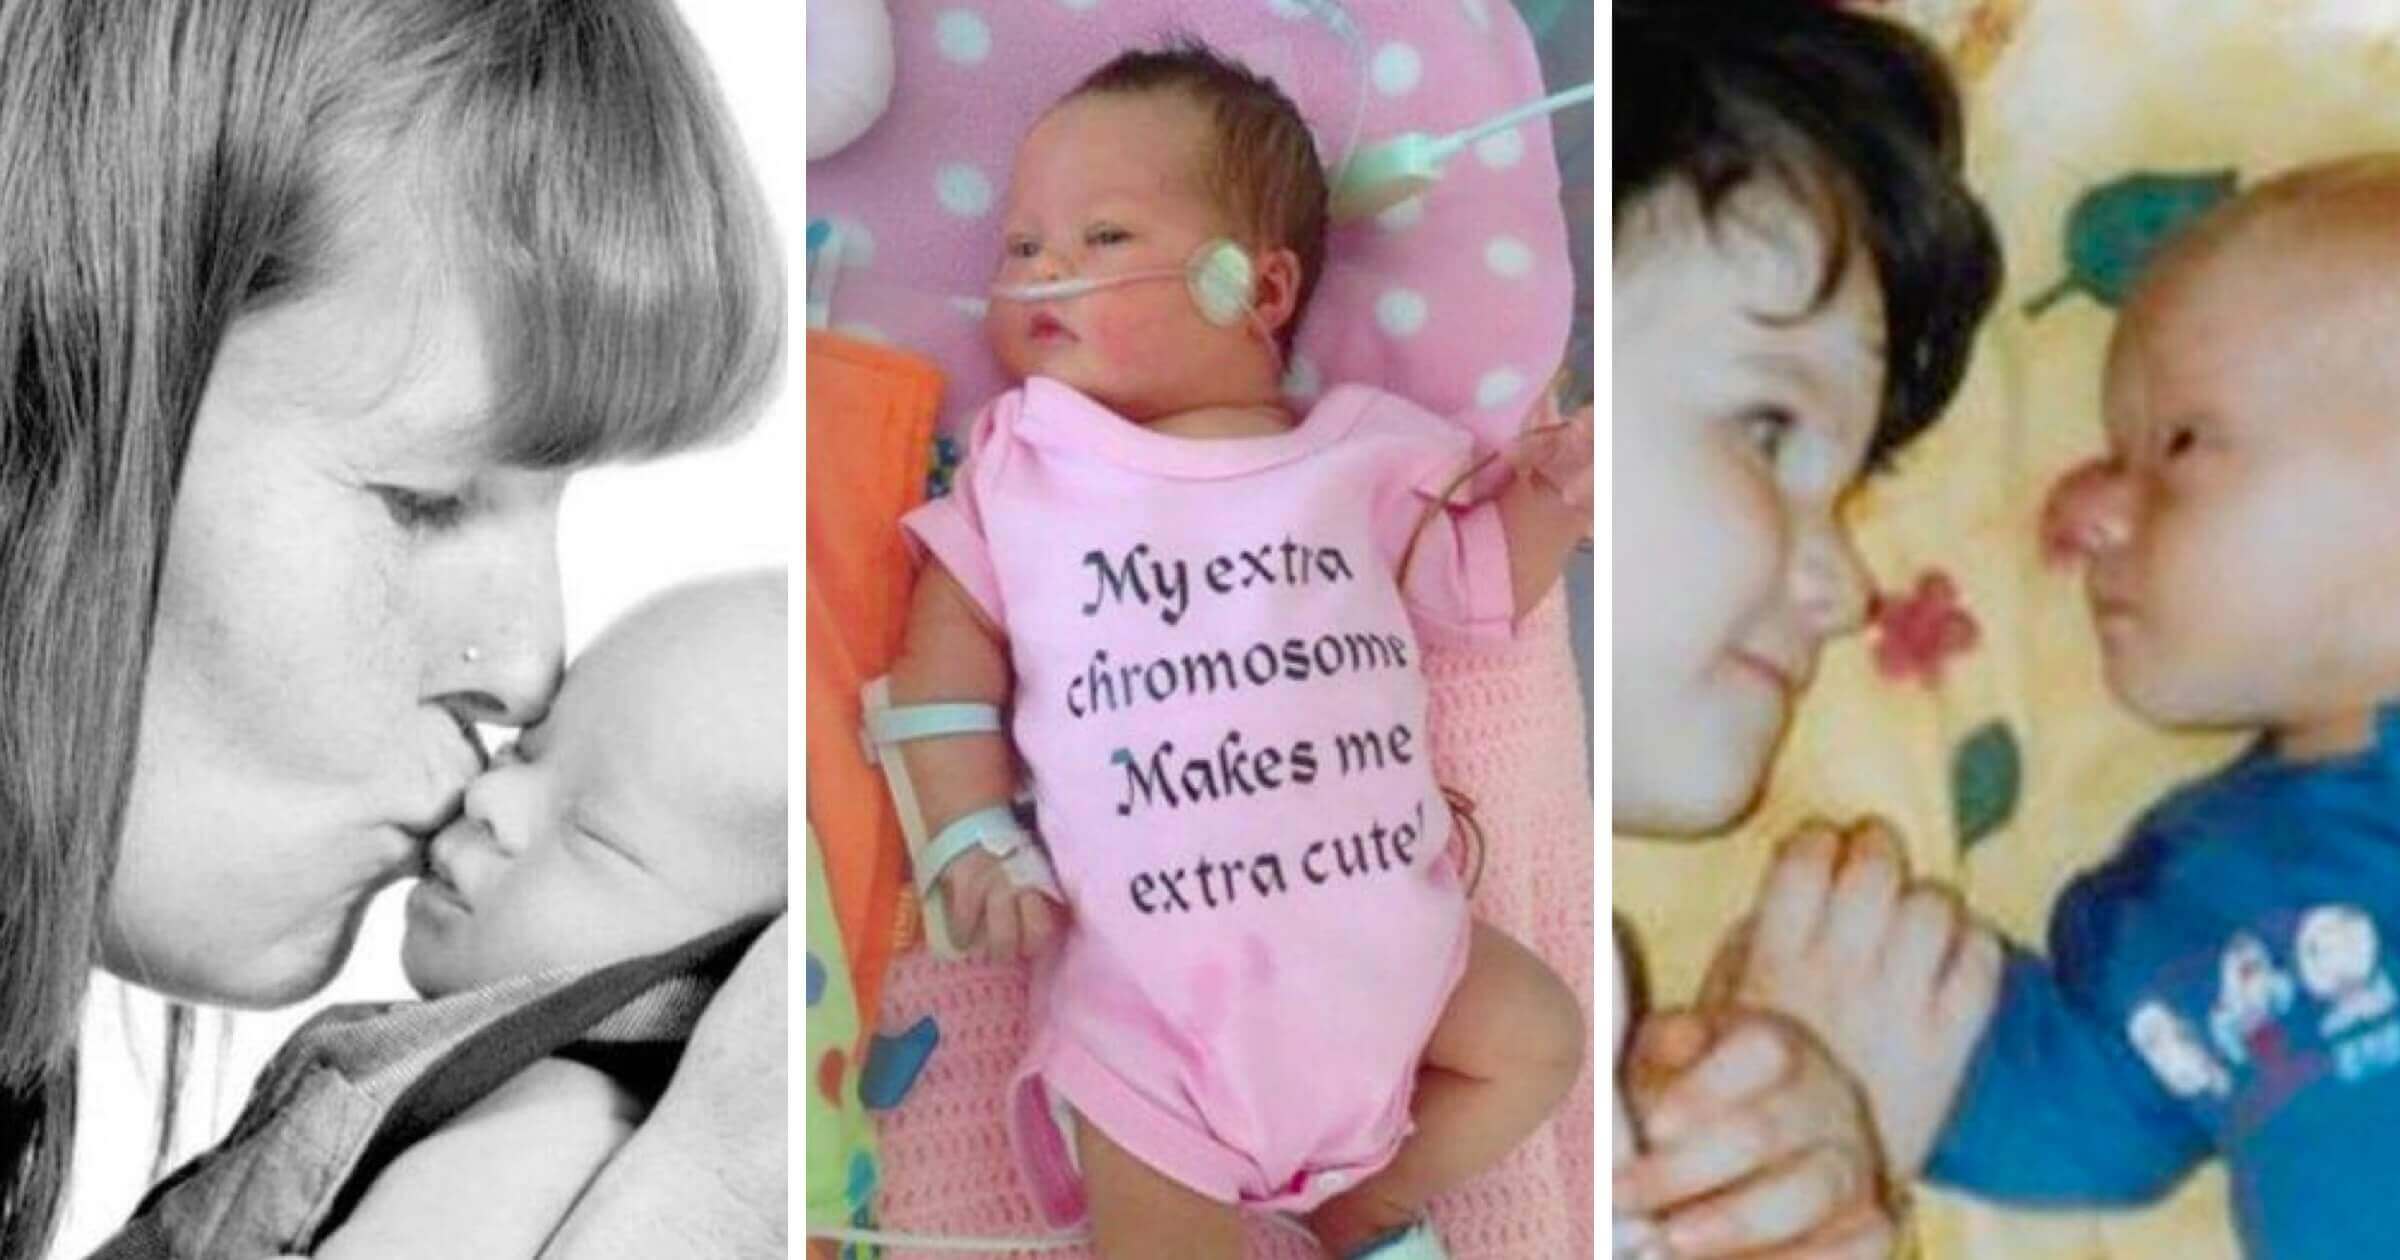 Pressured to abort because their baby had Down’s syndrome: three stories